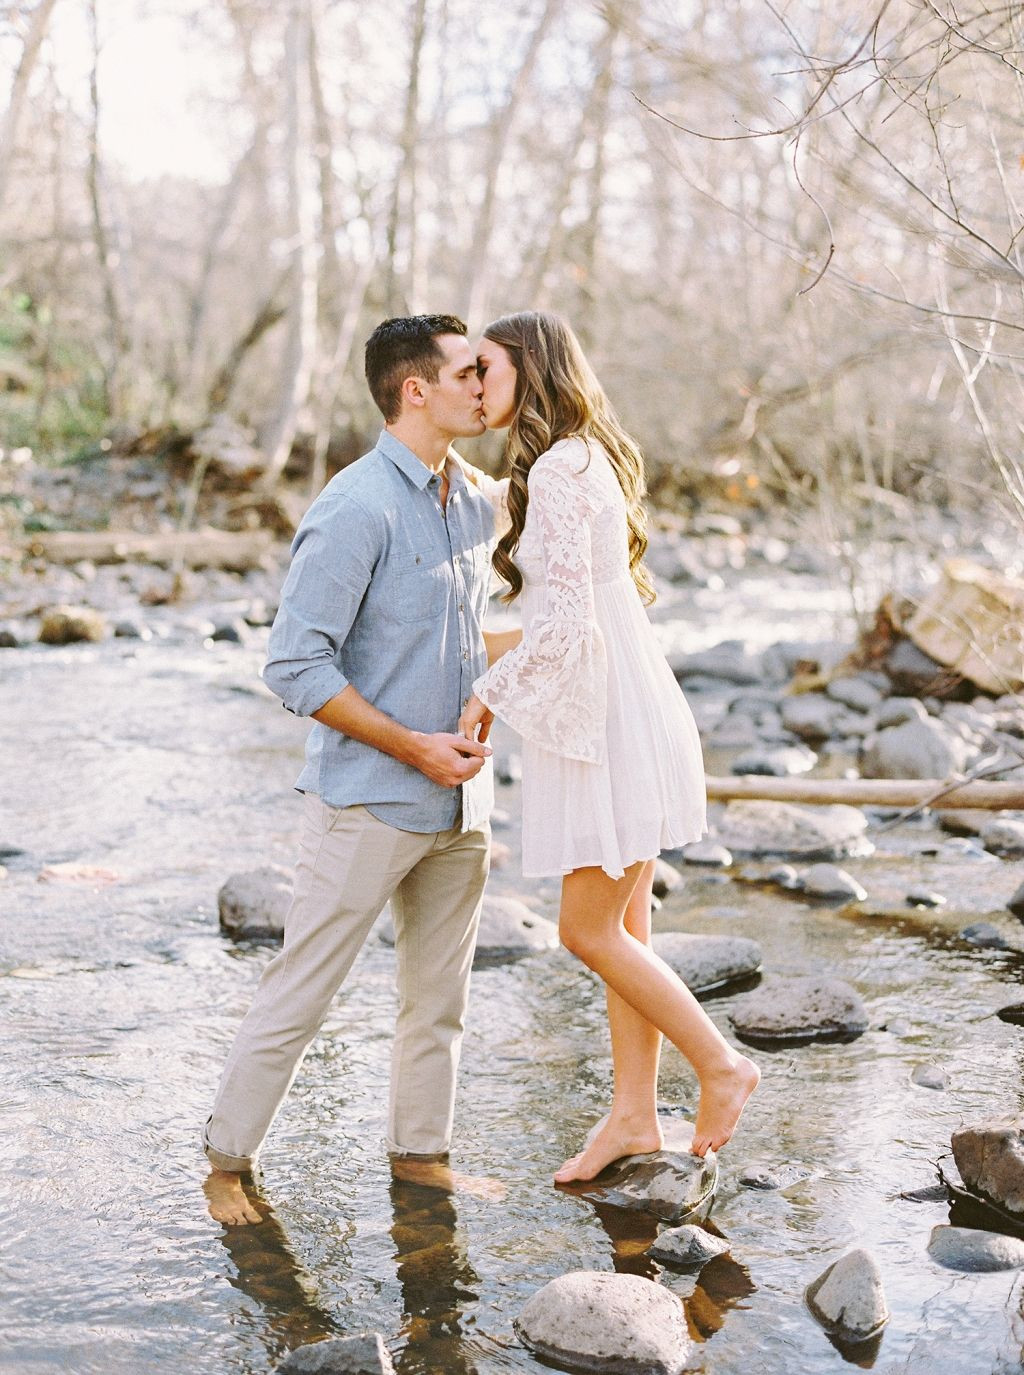 Engagement Photo Ideas For Summer
 Early Spring engagement shoot in Arizona via Magnolia